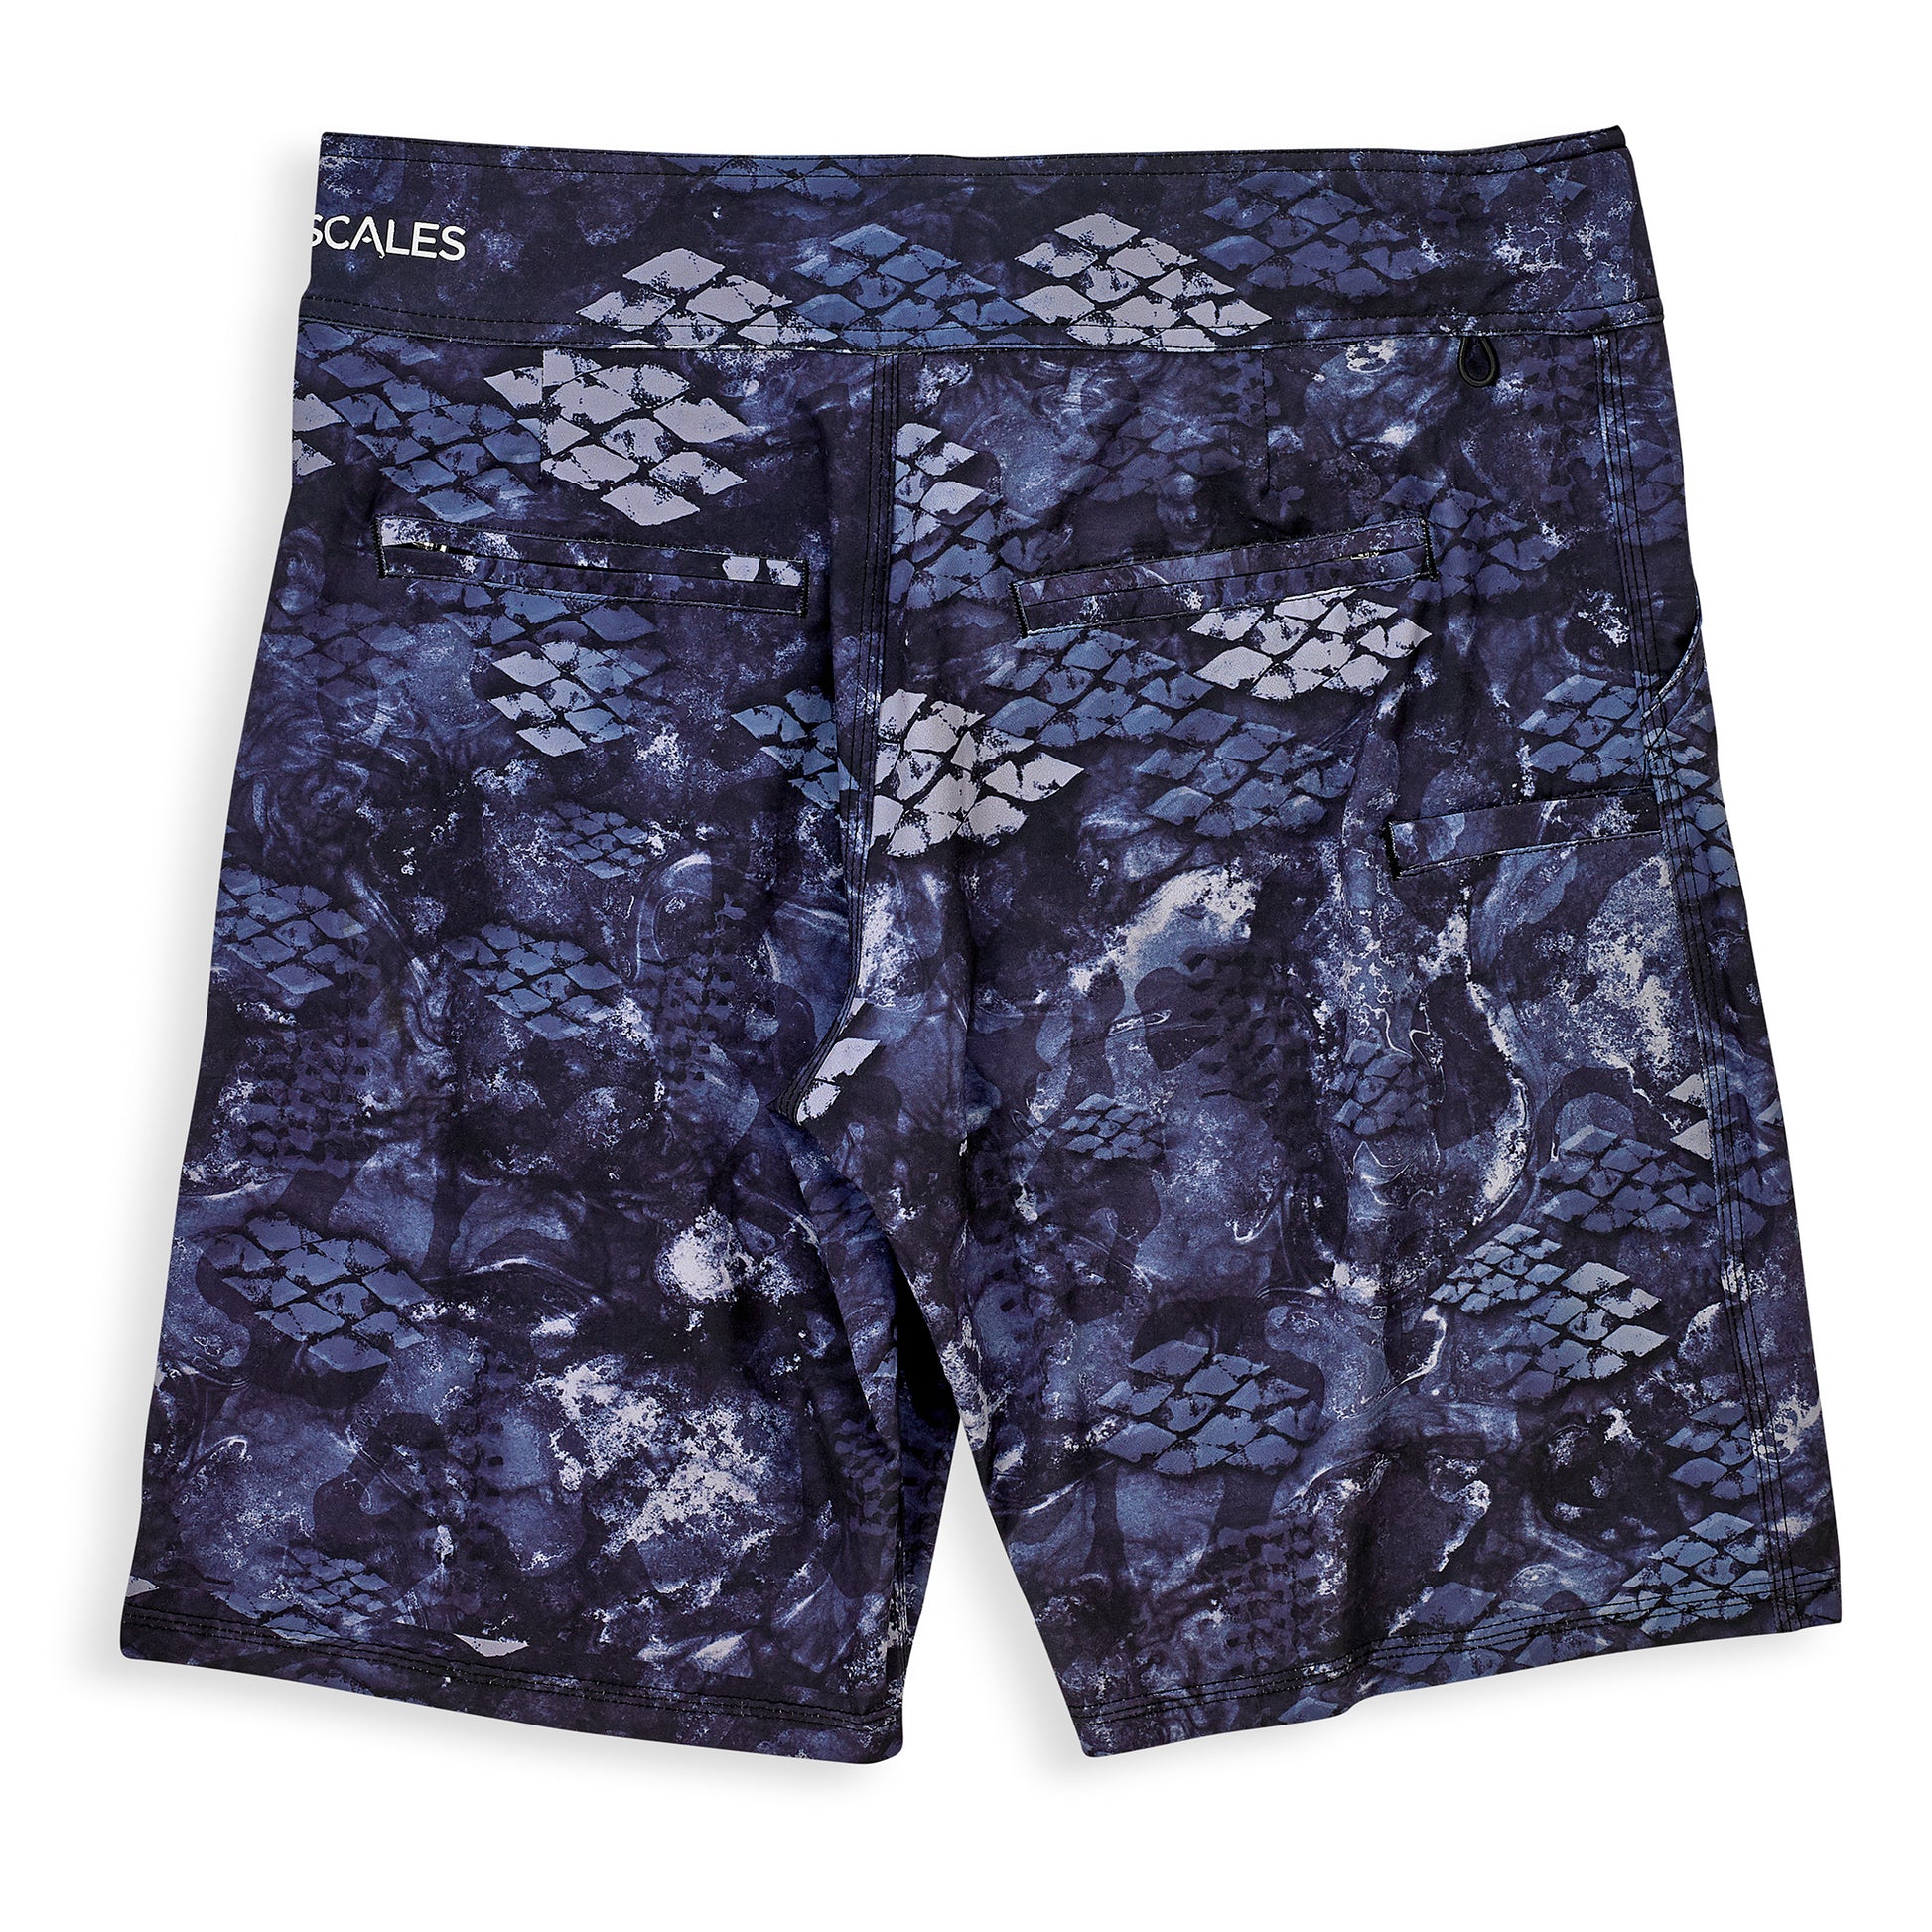 Scales Camo First Mates Boardshorts Black / W42